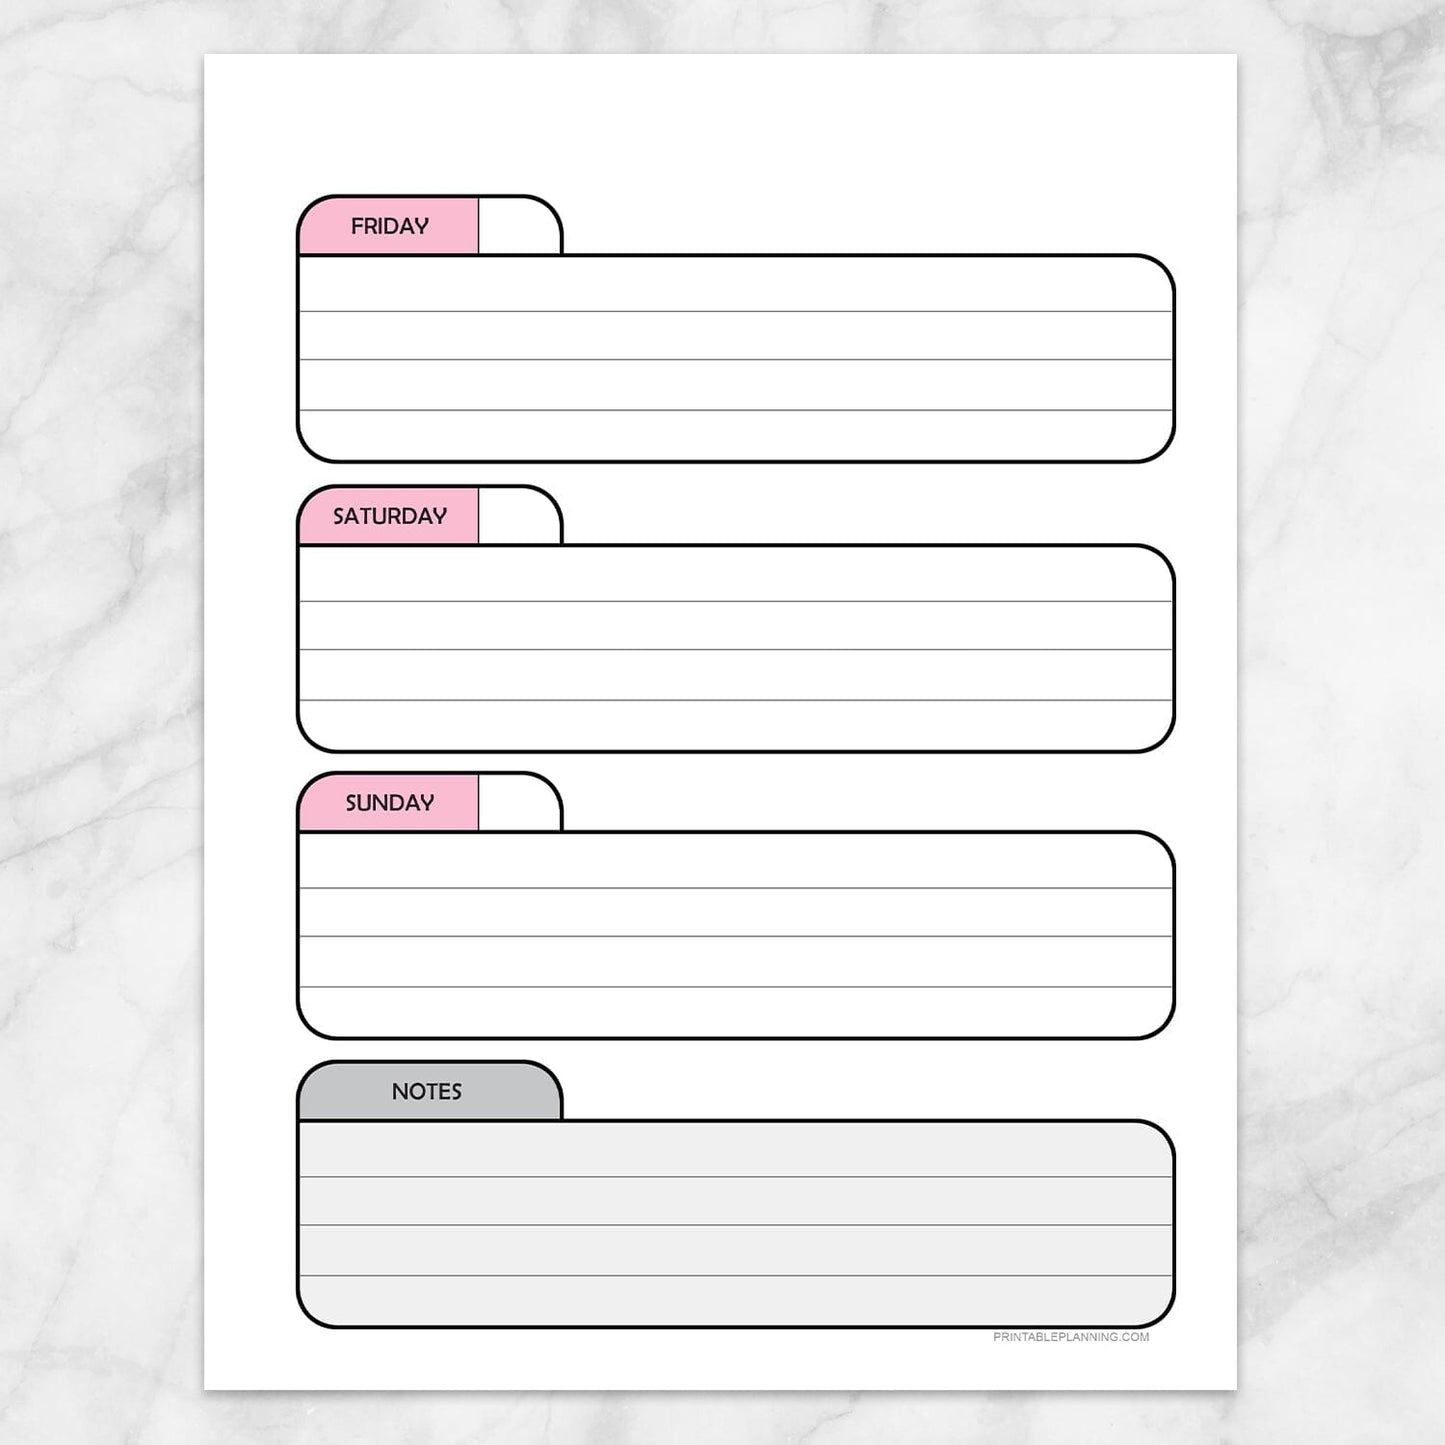 Printable Pink Weekly Calendar Planner Page (right page) at Printable Planning.